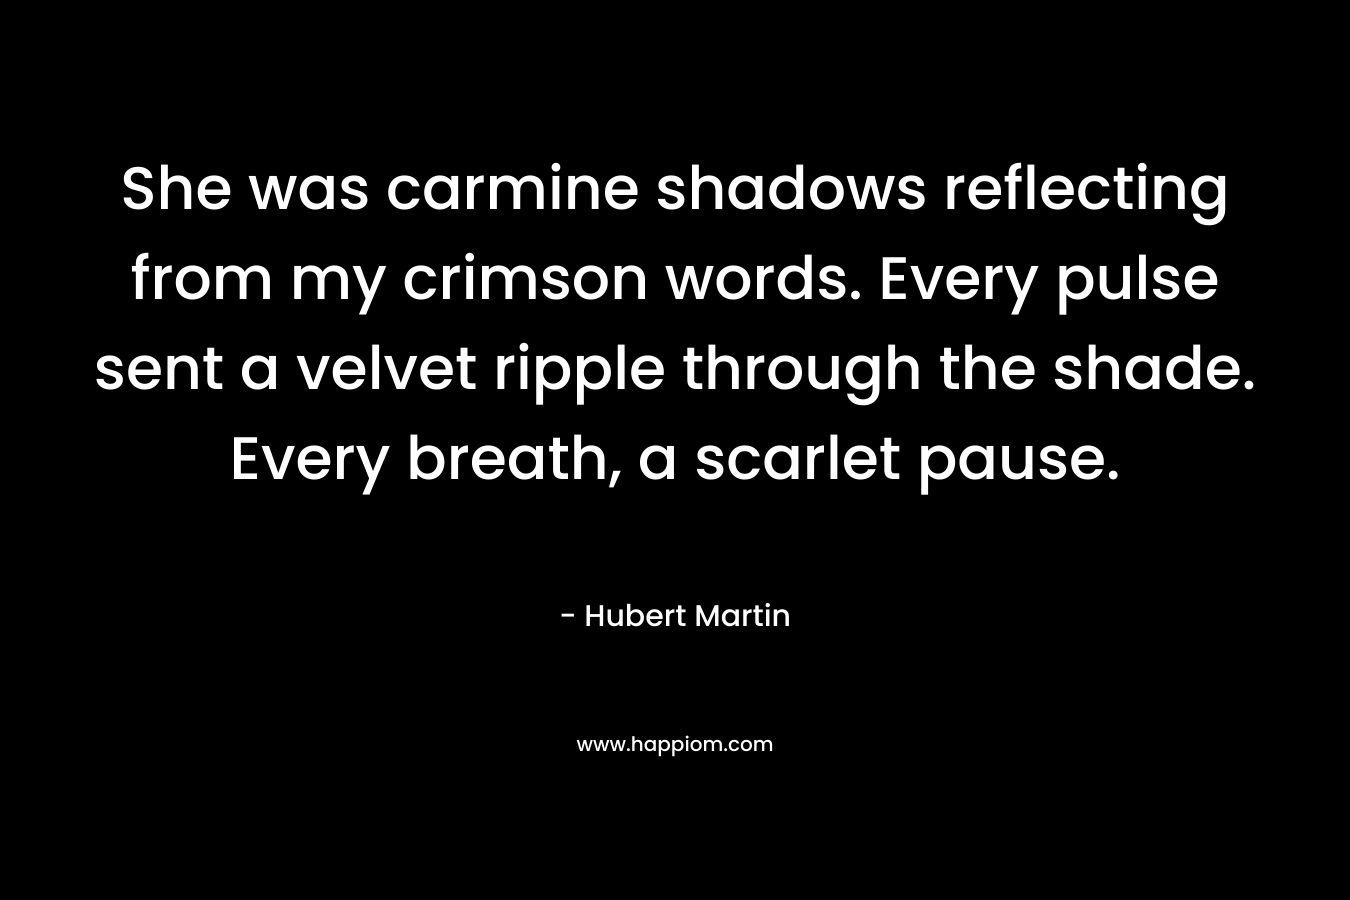 She was carmine shadows reflecting from my crimson words. Every pulse sent a velvet ripple through the shade. Every breath, a scarlet pause.